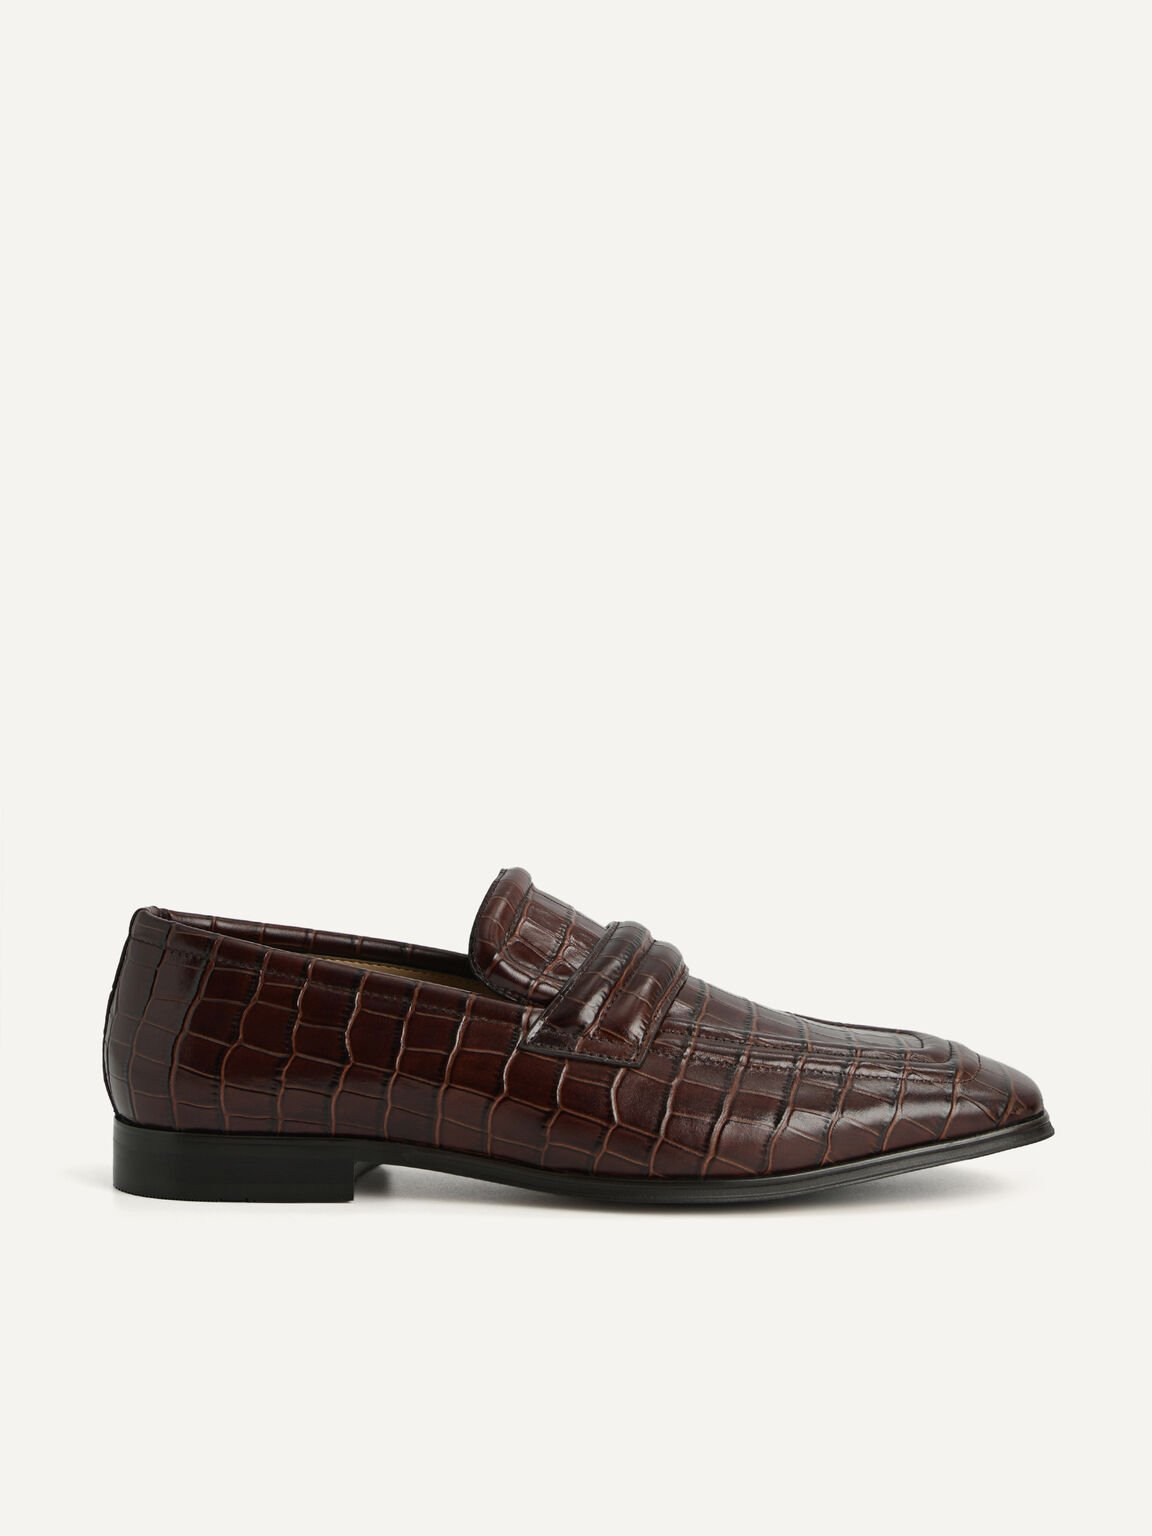 Croc-Effect Leather Loafers, Dark Brown